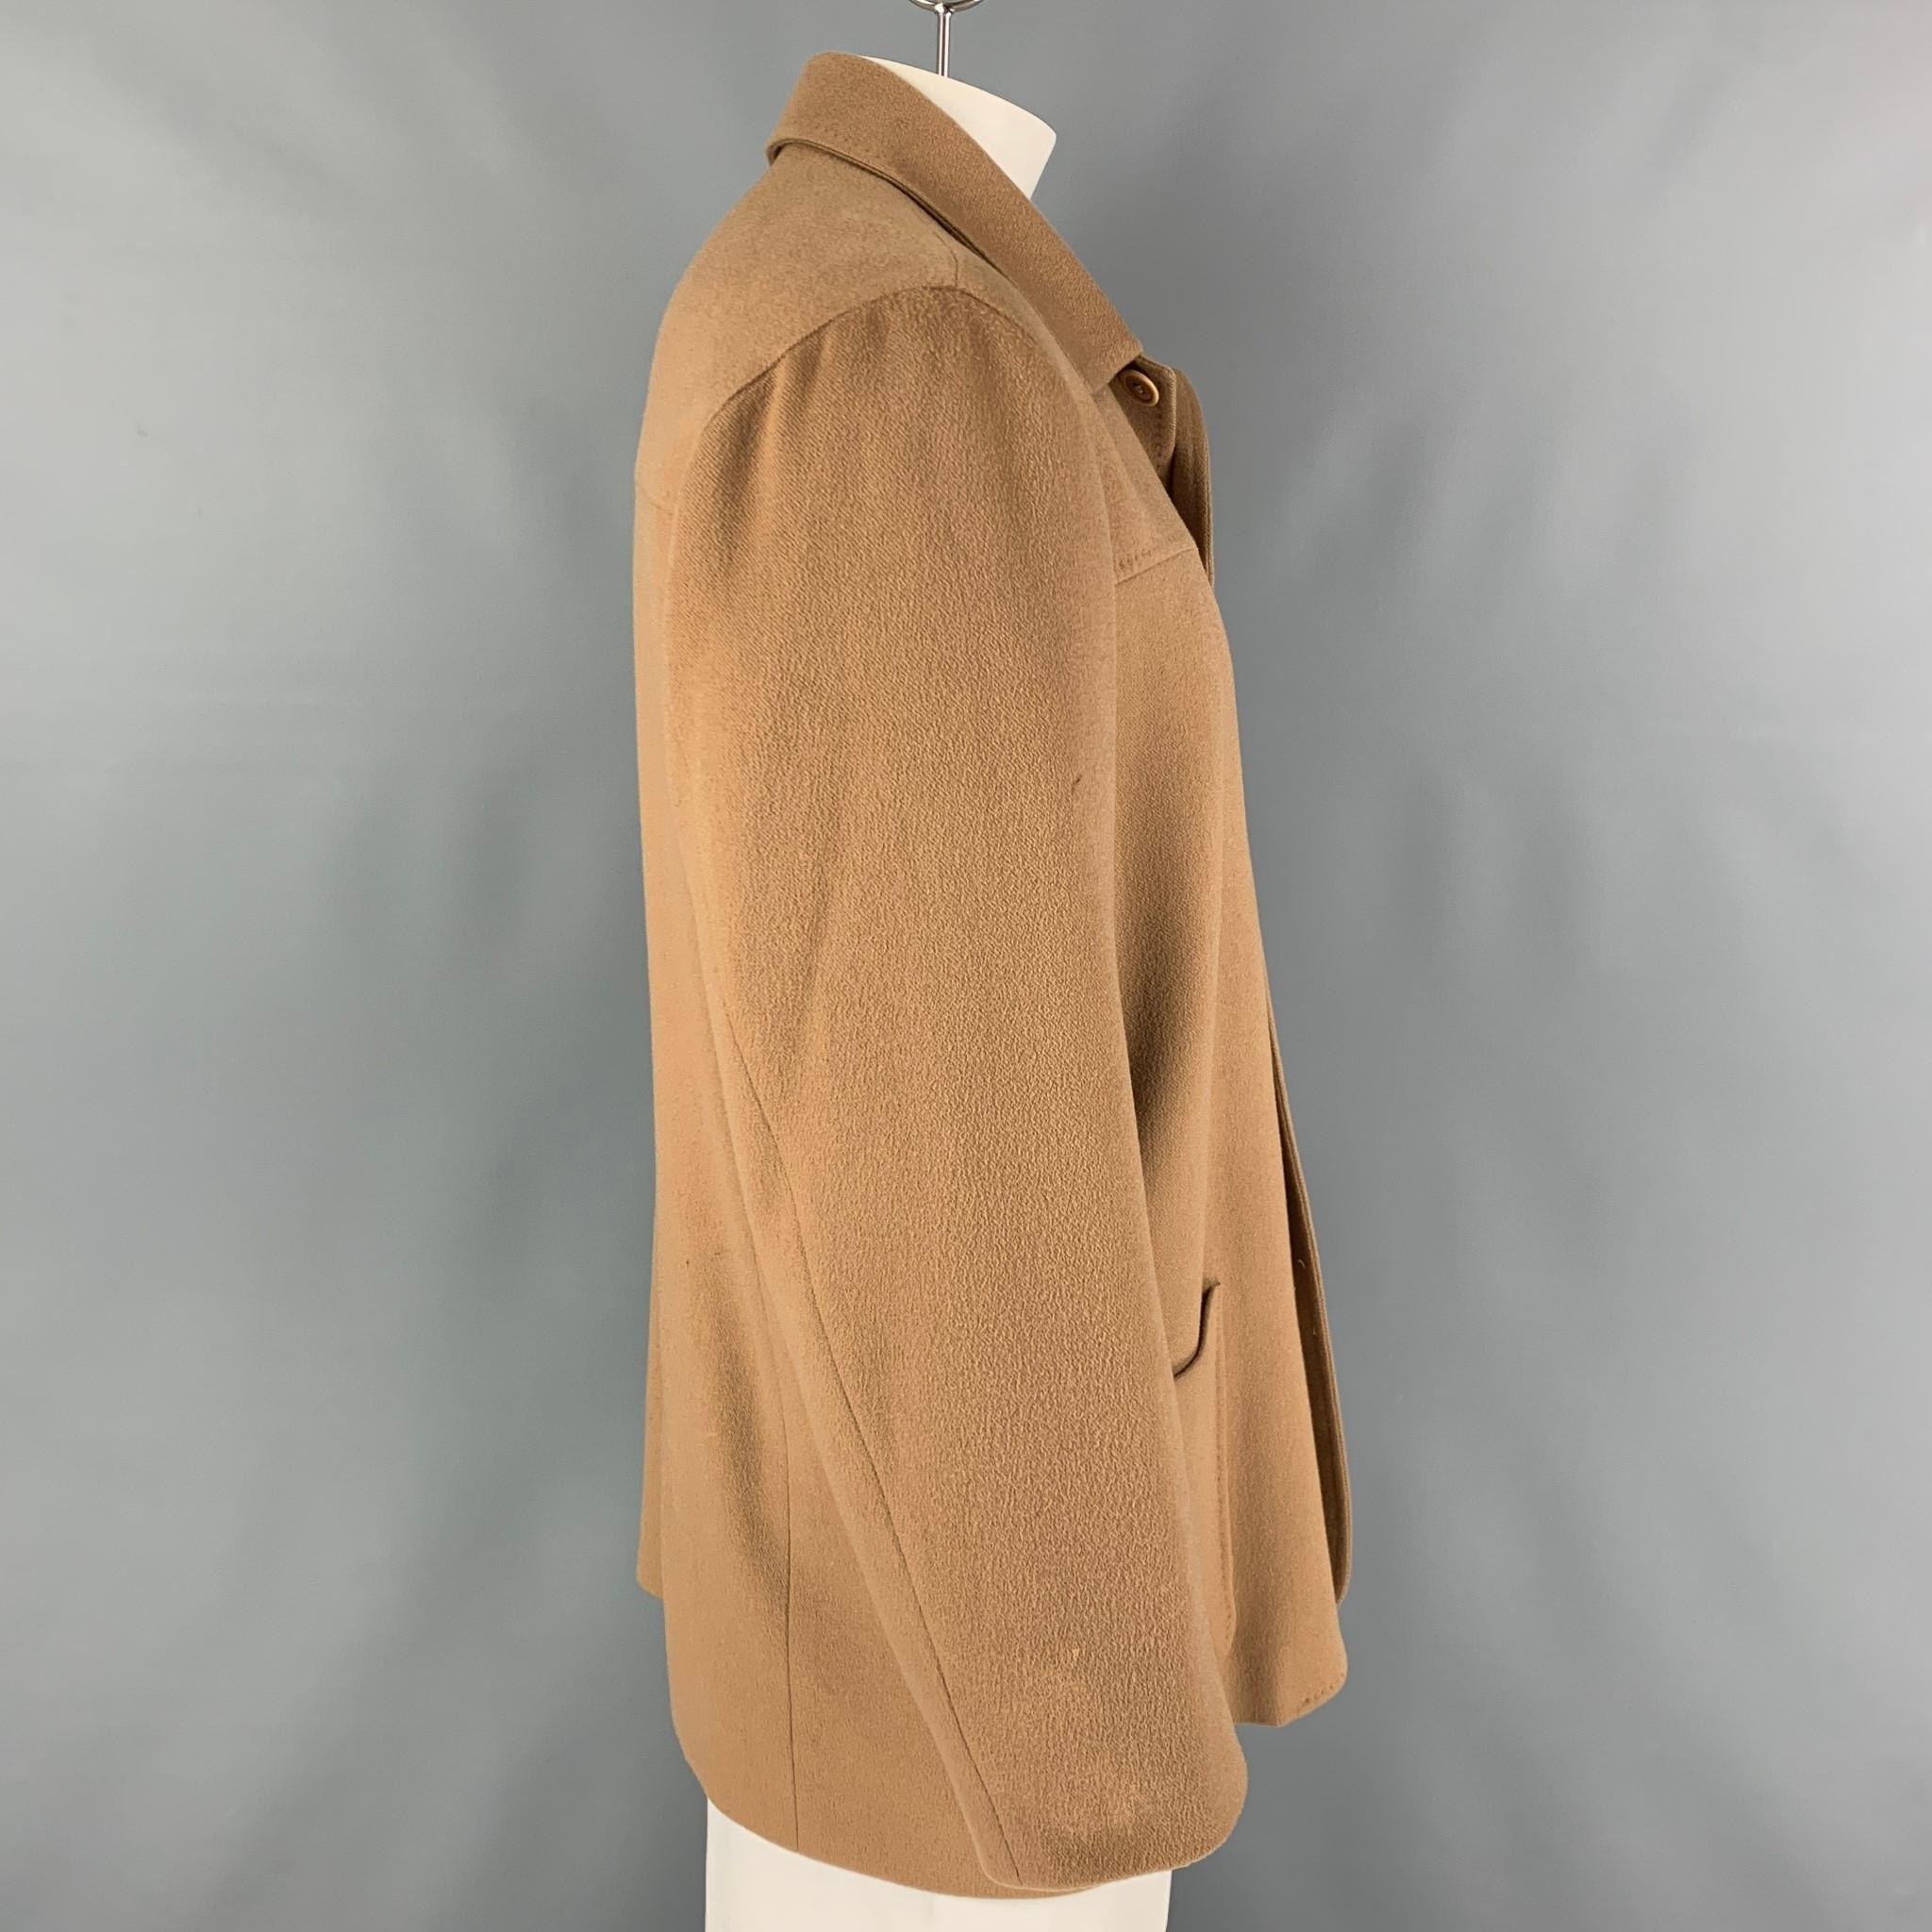 ERMENEGILDO ZEGNA jacket comes in a camel cashmere with a full liner featuring a spread collar, patch pockets, and a buttoned closure. Made in Italy.

Very Good Pre-Owned Condition.
Marked: L/52

Measurements:

Shoulder: 21 in.
Chest: 44 in.
Sleeve: